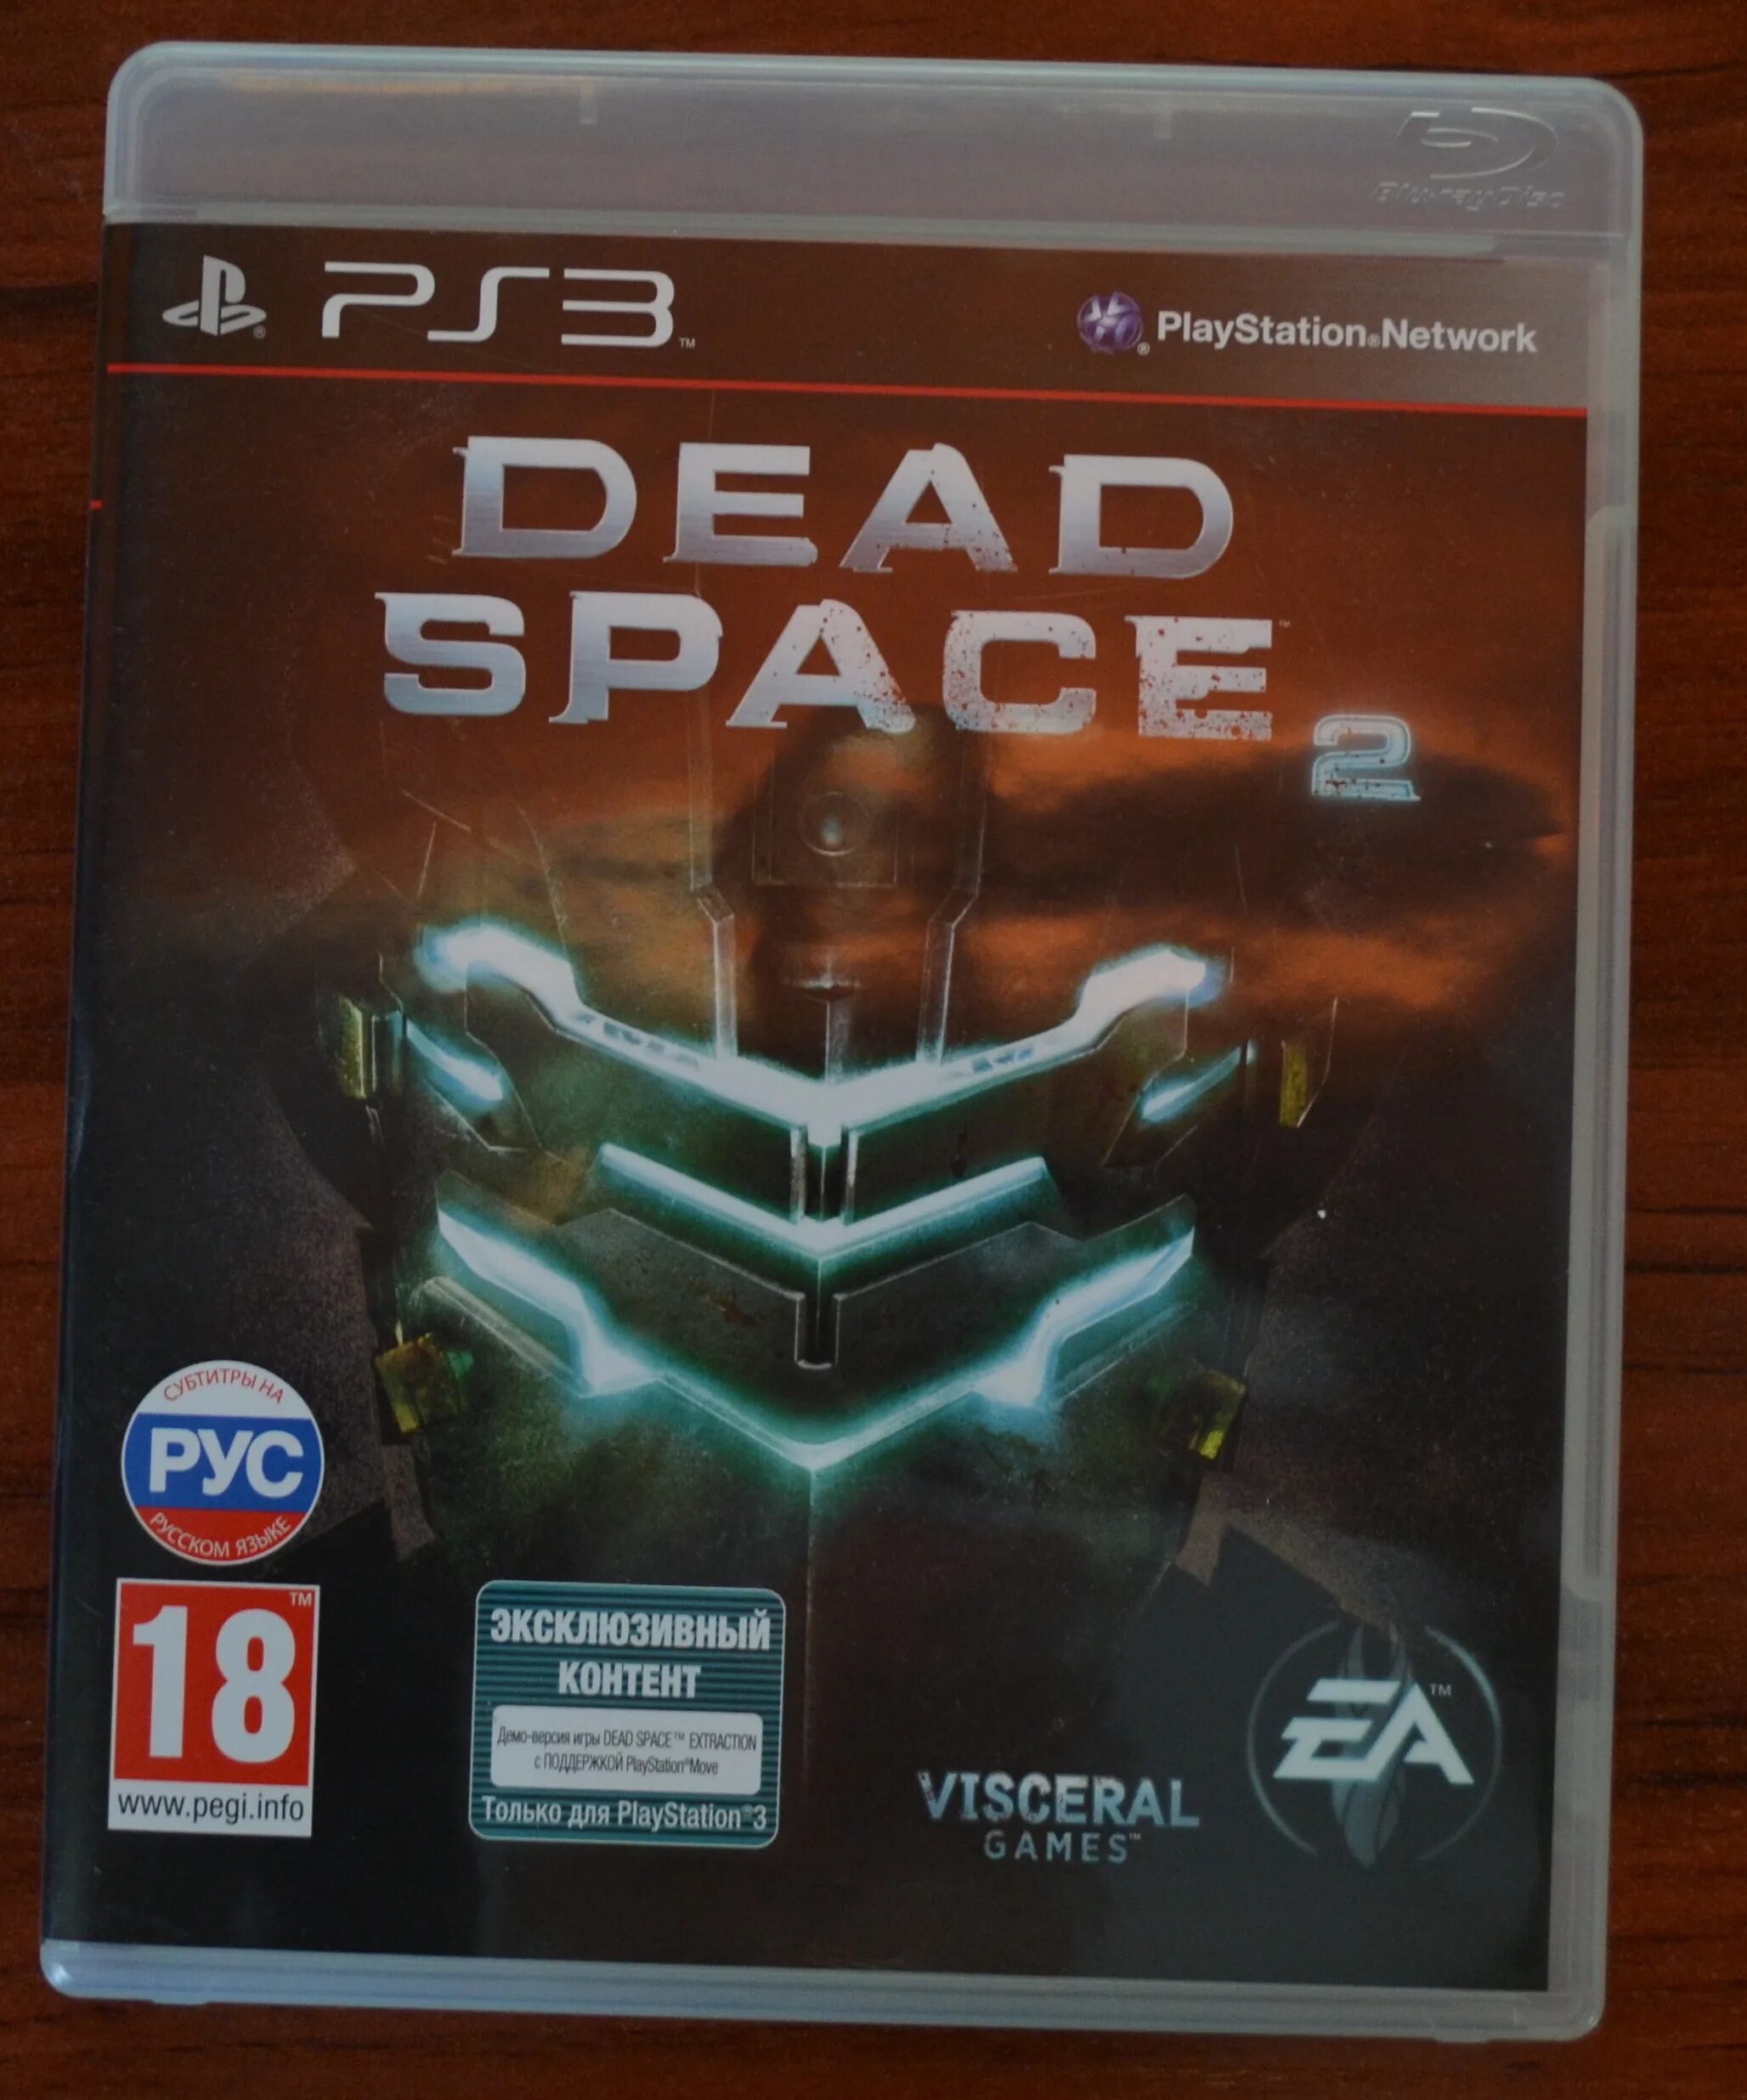 Dead Space 2 Limited Edition ps3. Диск ПС 3 дед Спейс. Dead Space 3 Limited Edition ps3 диск. Dead Space 2 ps3. Dead space ps5 купить